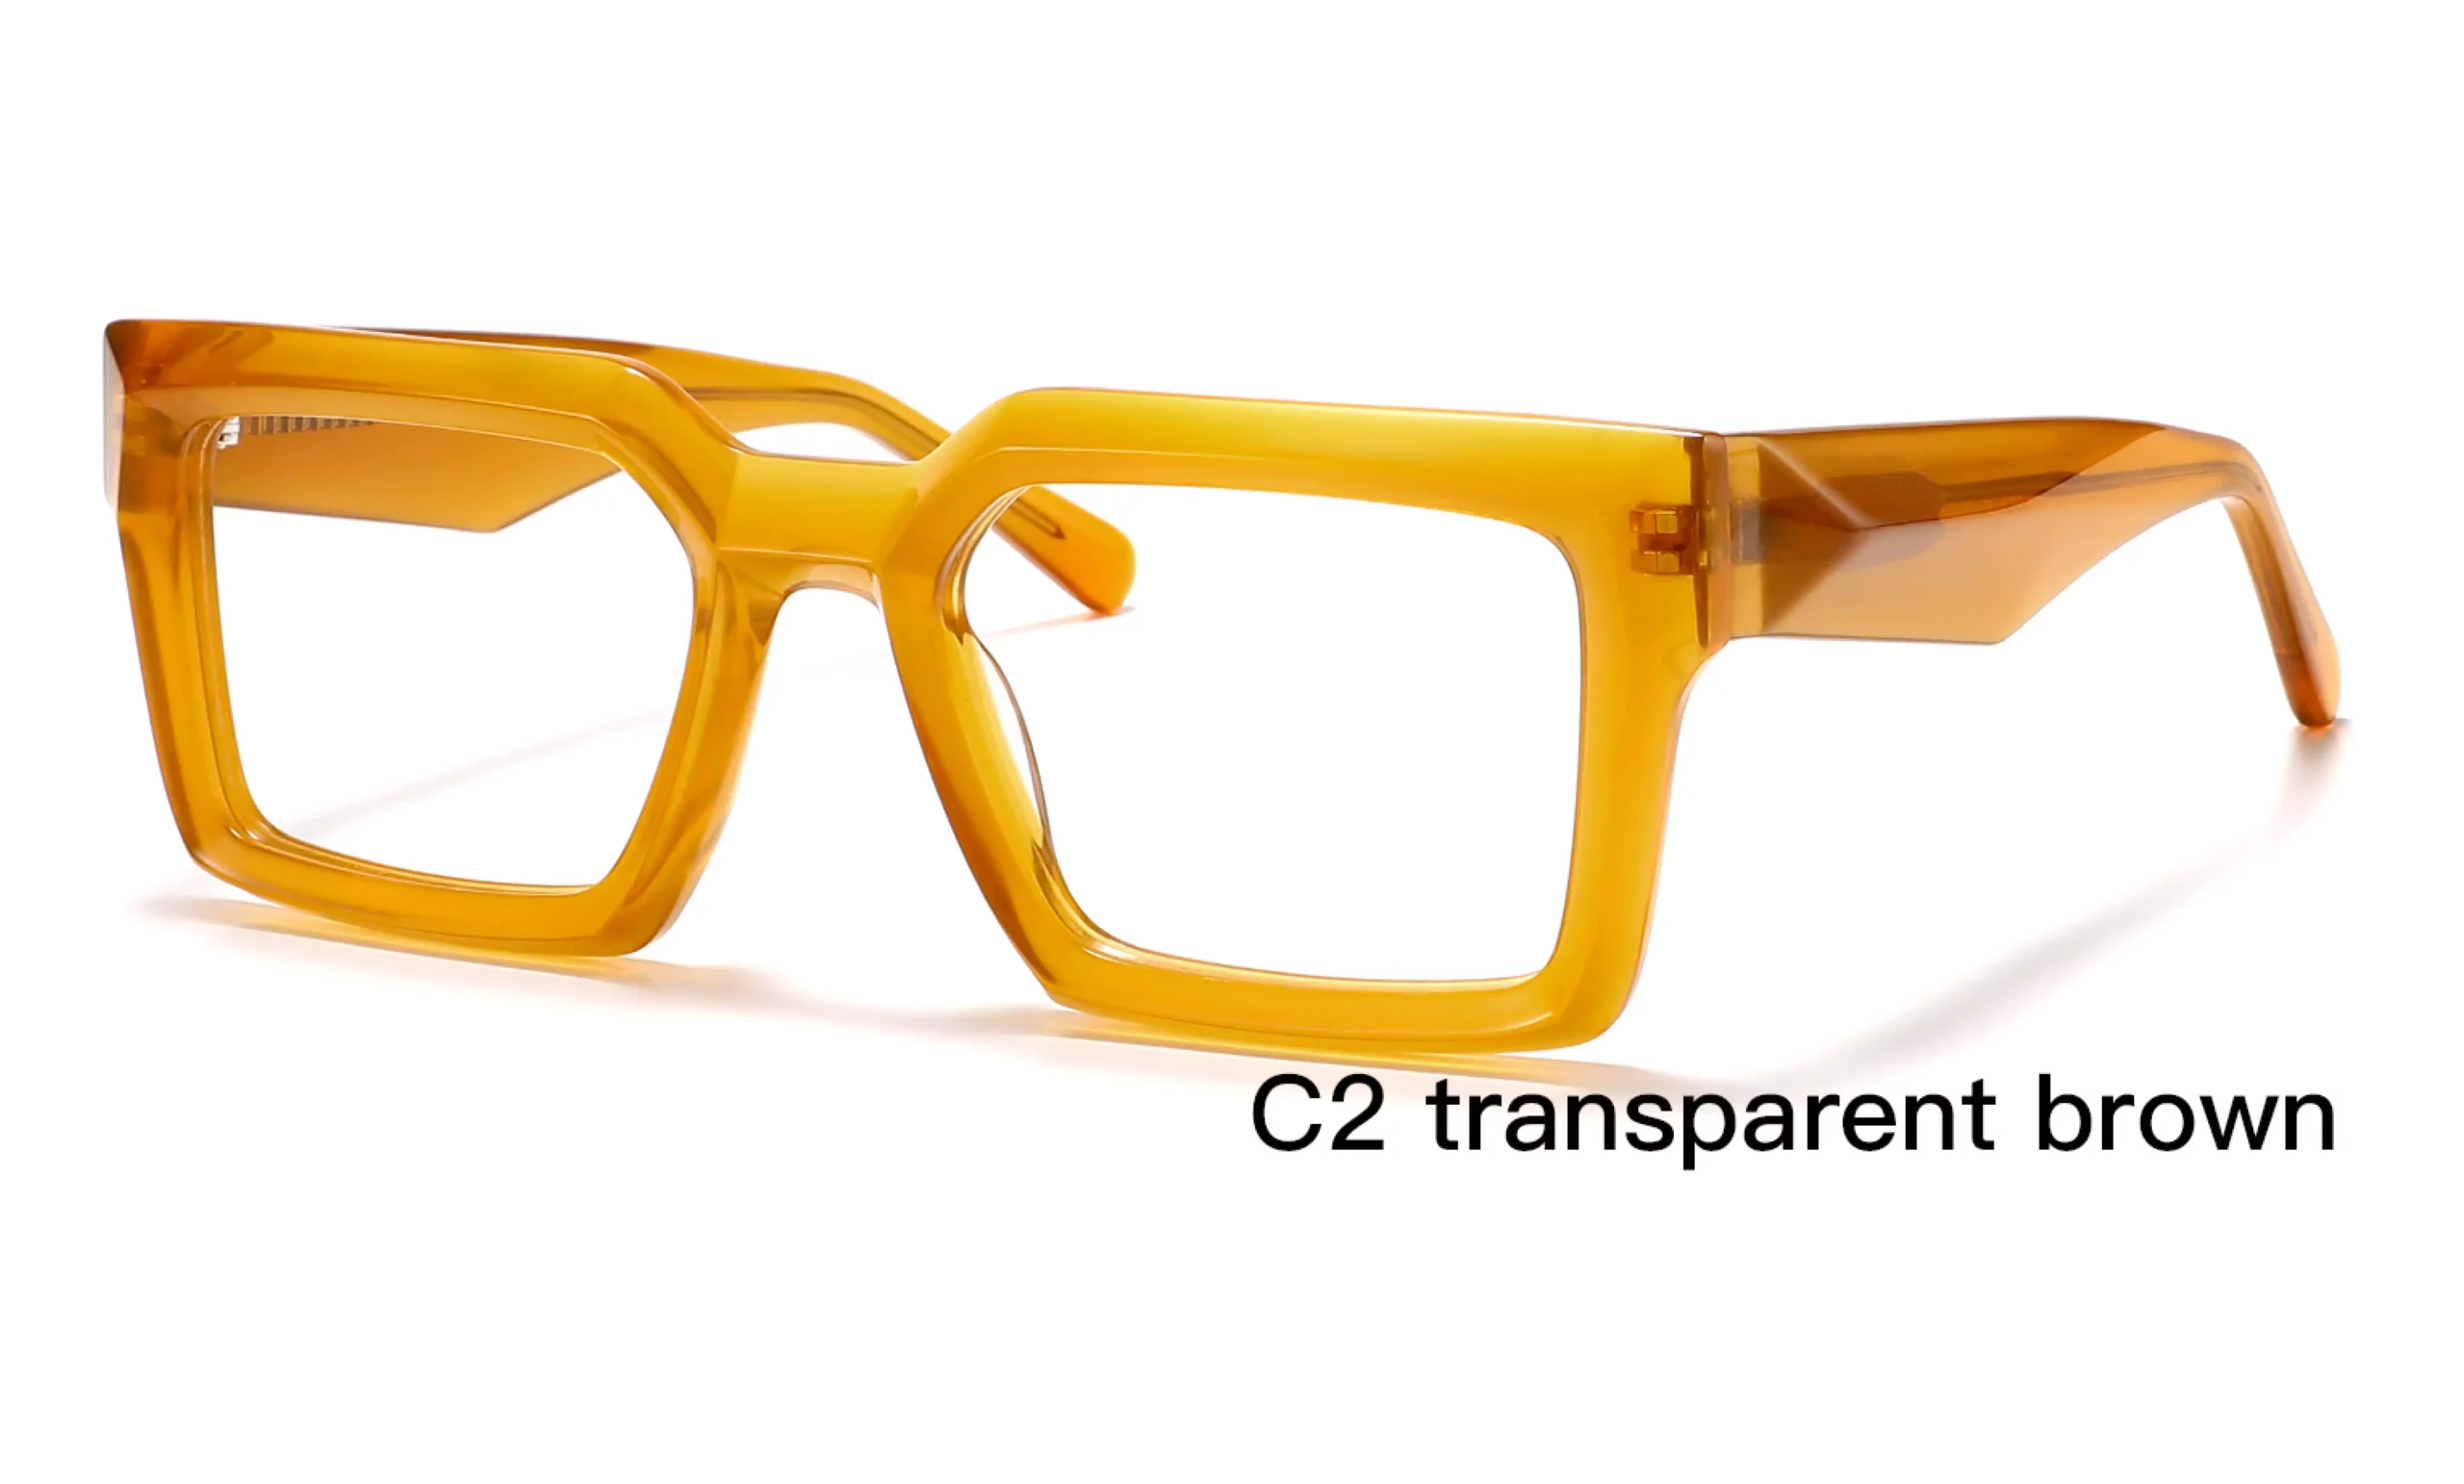 wholesale replica designer glasses, transparent brown, thick frame, frosted wire core, acetate, made in China